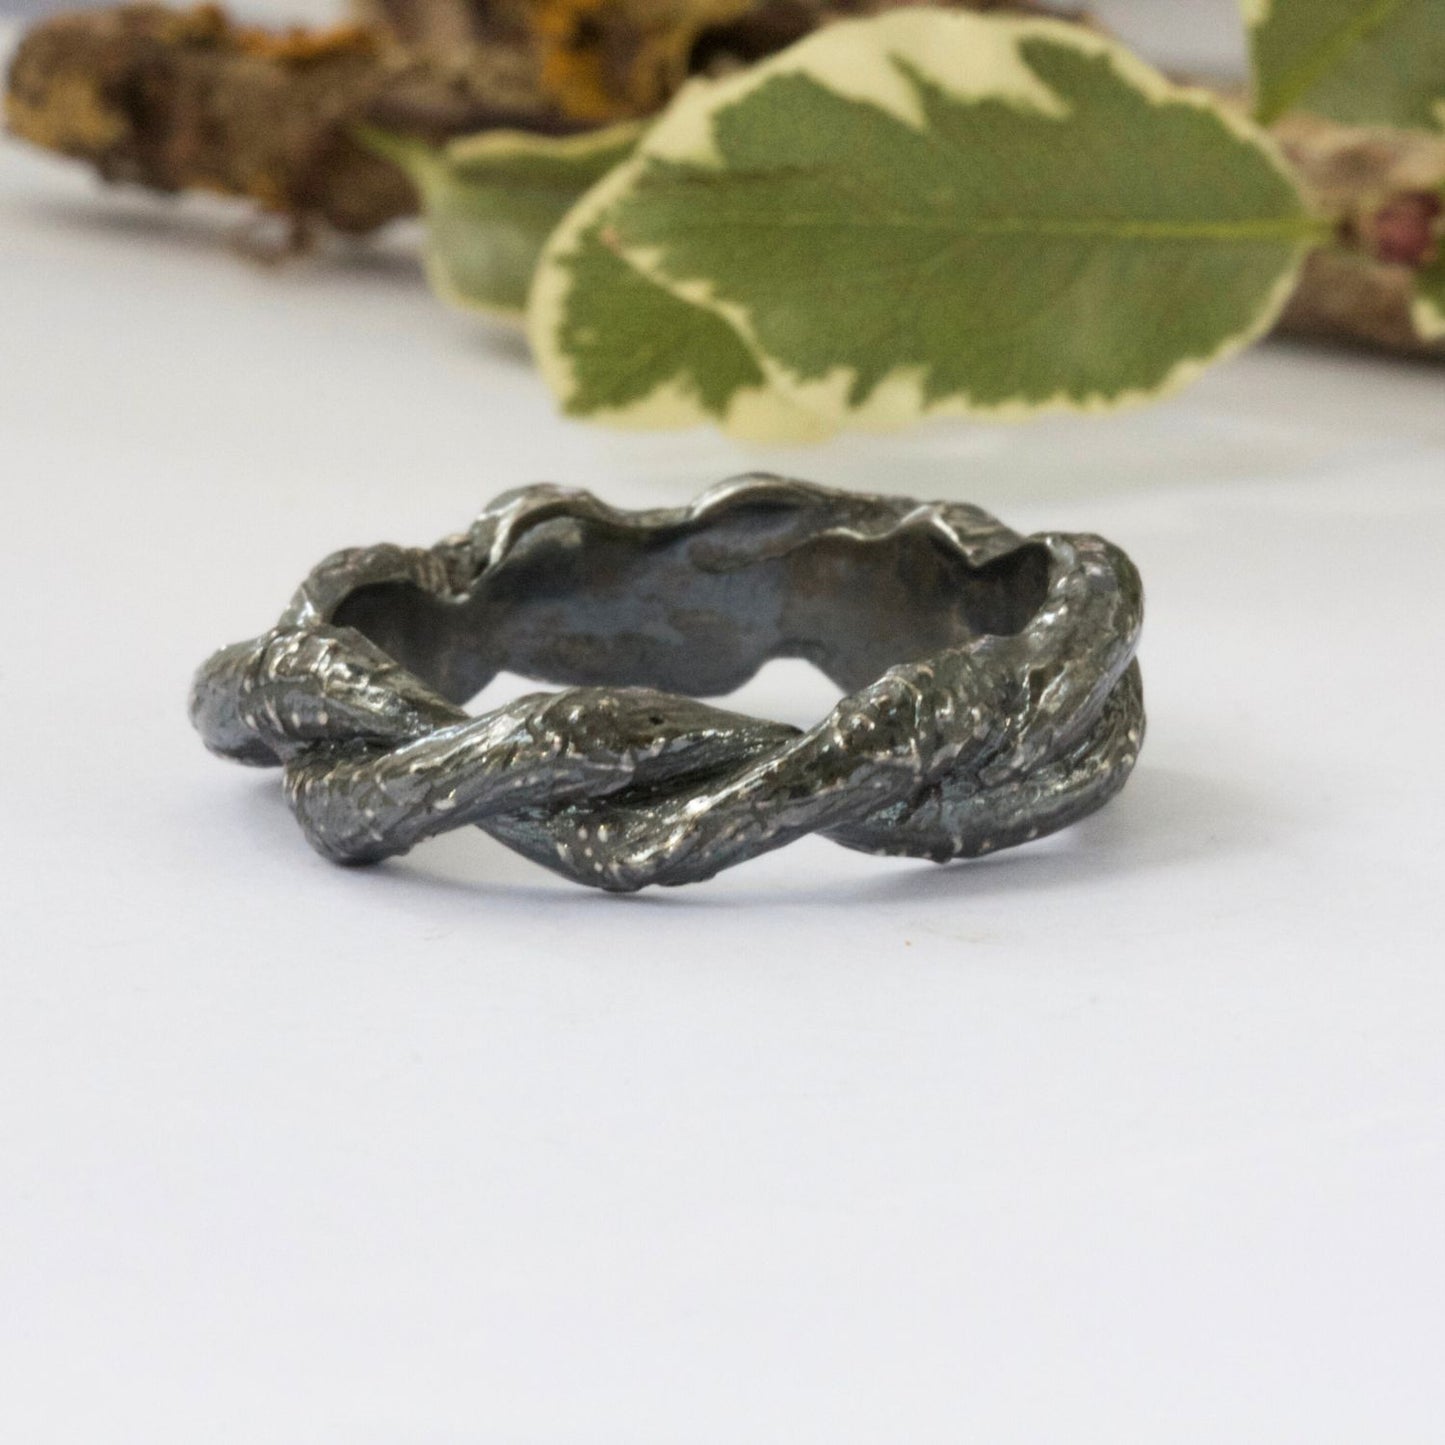 Entwined Branch Ring, Rustic Ring, Silver Tree Branch Ring, Thumb Ring